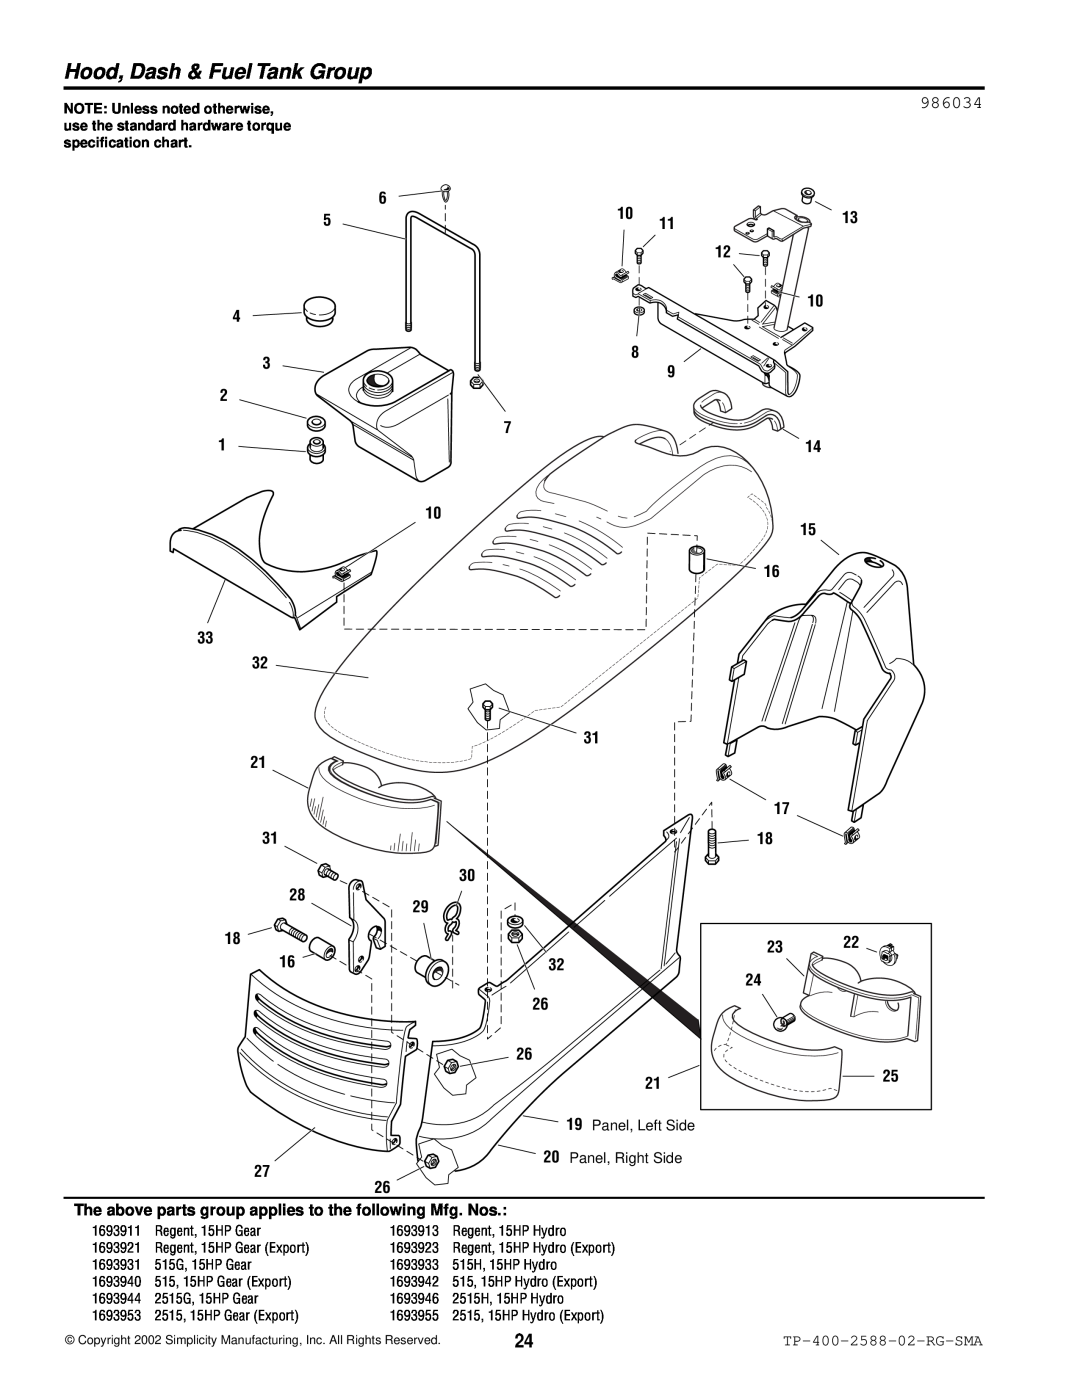 Simplicity 500 Series manual Hood, Dash & Fuel Tank Group, 986034, The above parts group applies to the following Mfg. Nos 